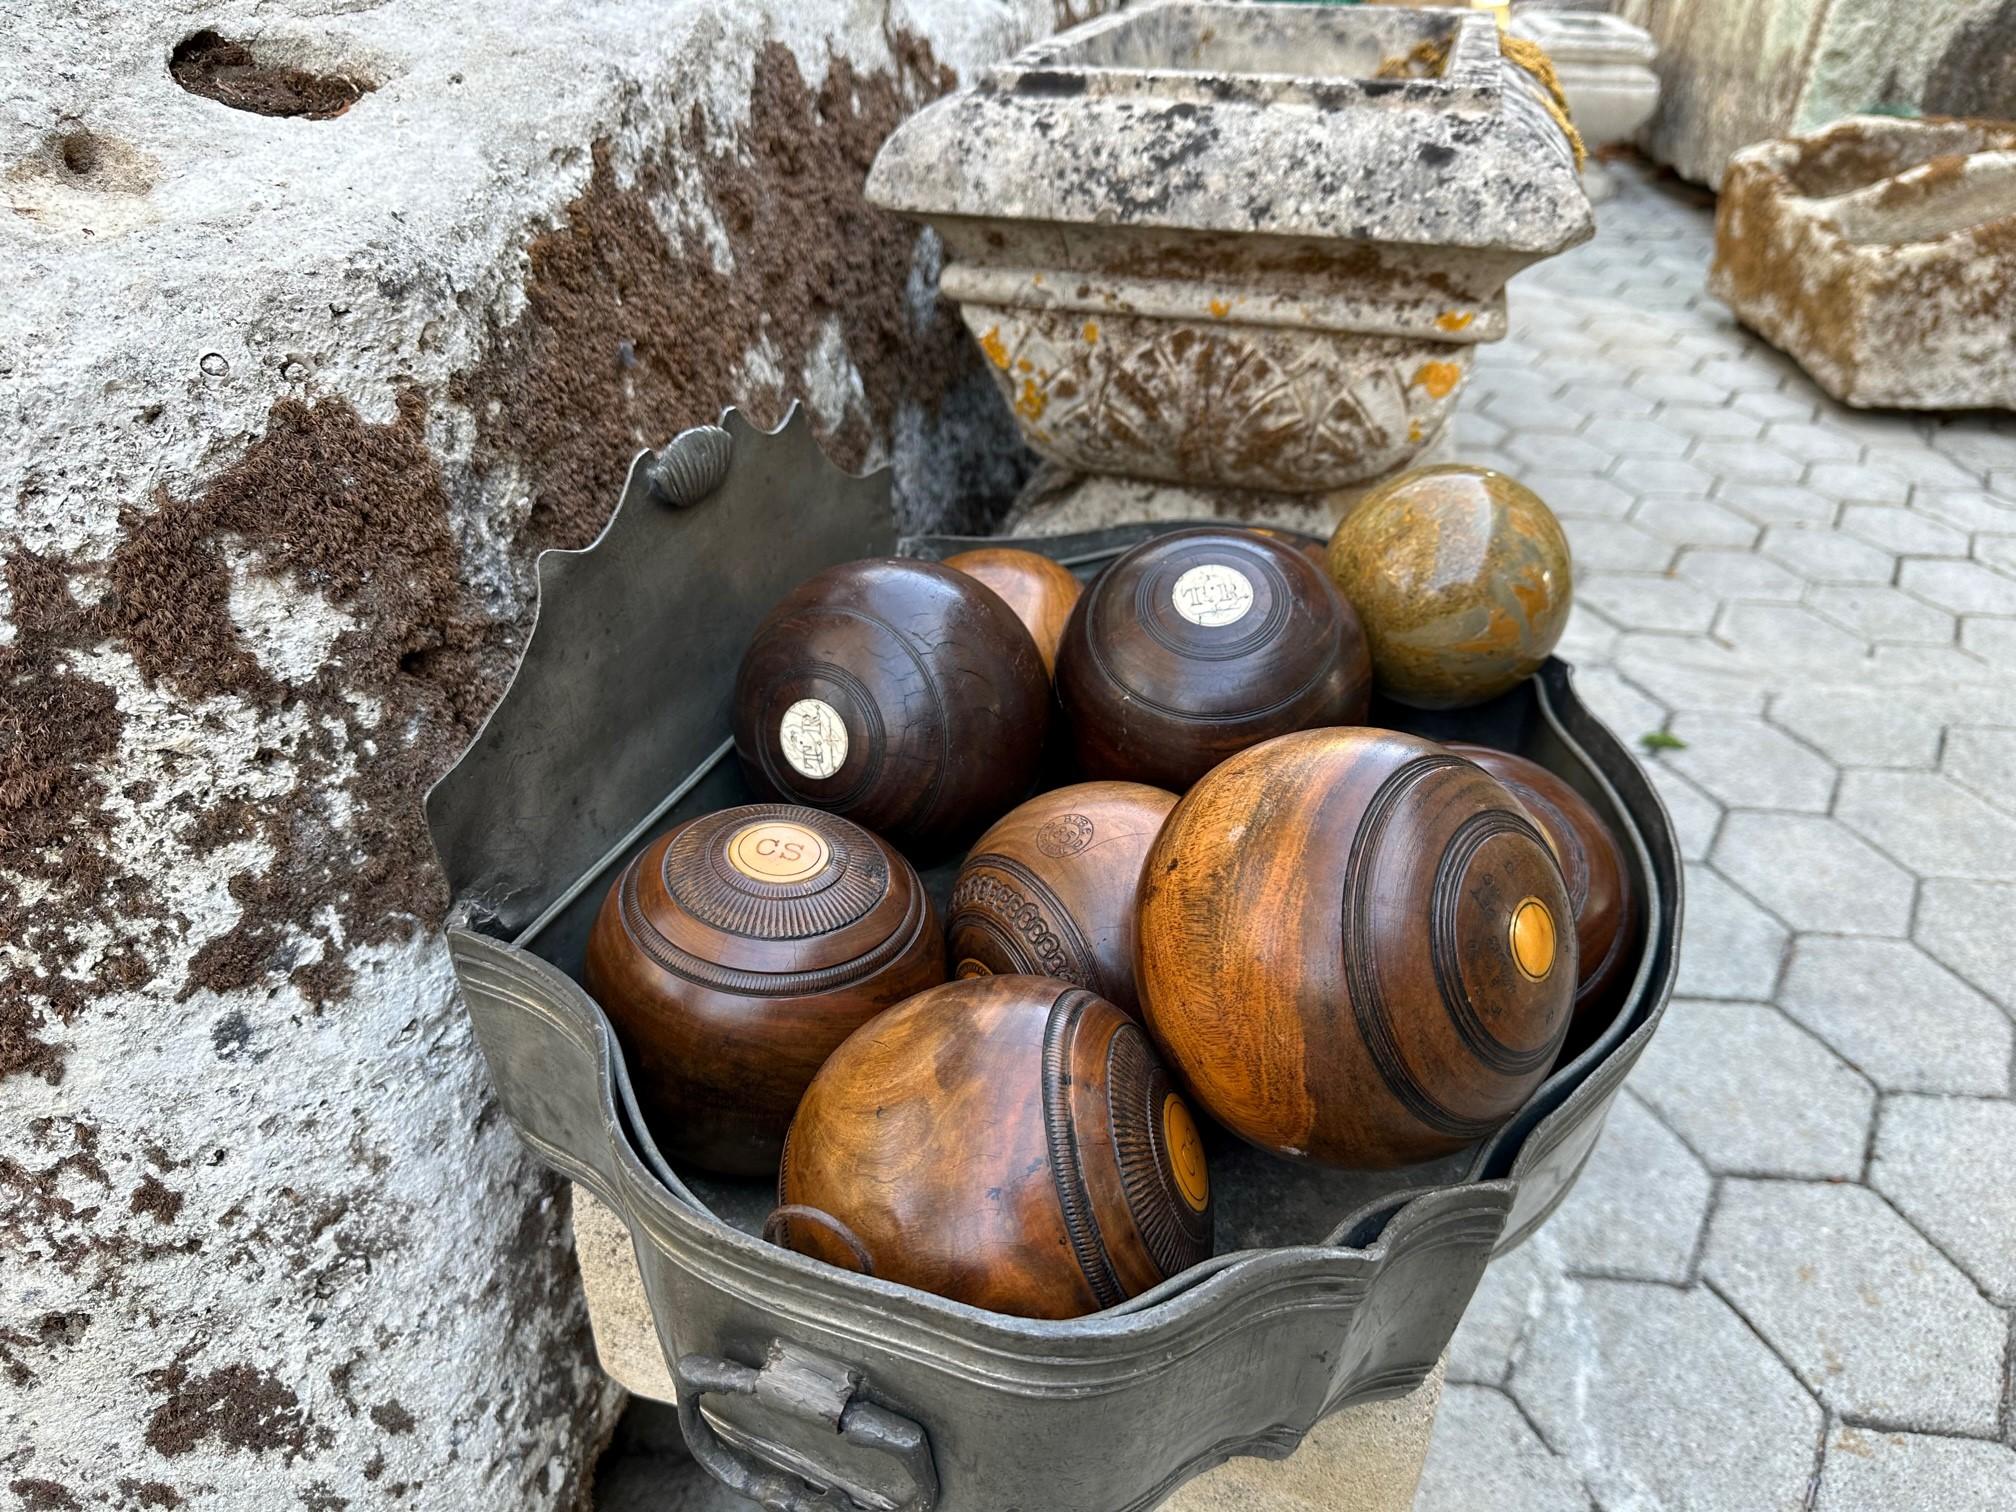 10 Carpet Lawn Bowling Hand Carved Wood & Stone Balls Antique Office Gift Idea In Good Condition For Sale In West Hollywood, CA